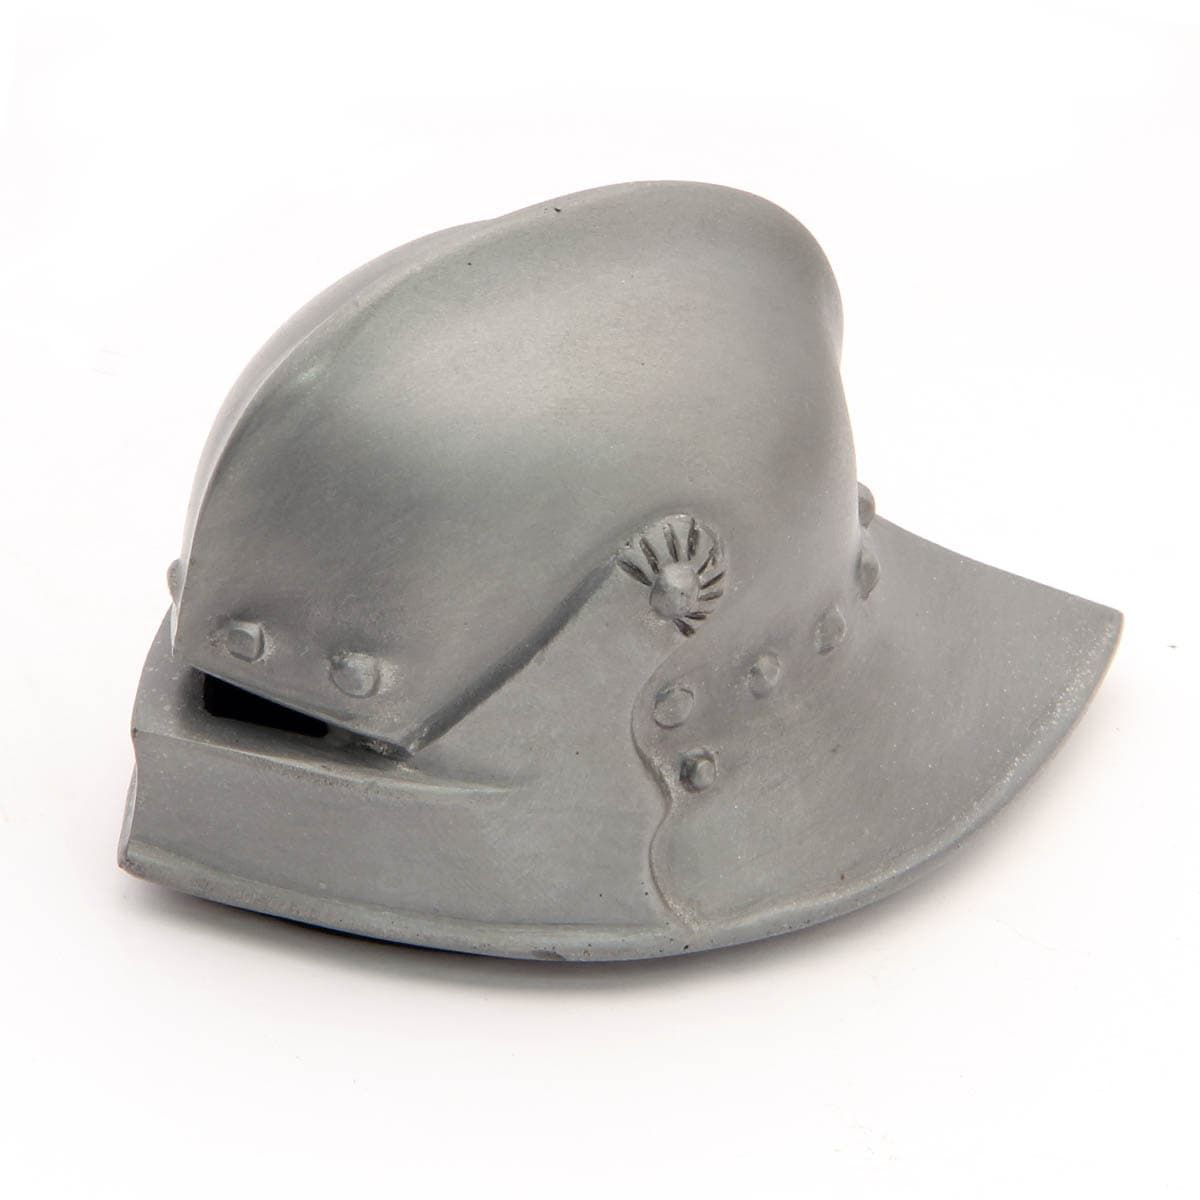 miniature pewter Knightly Sallet helmet for paperweight or home decor has felt-covered bottom for anti-scratching